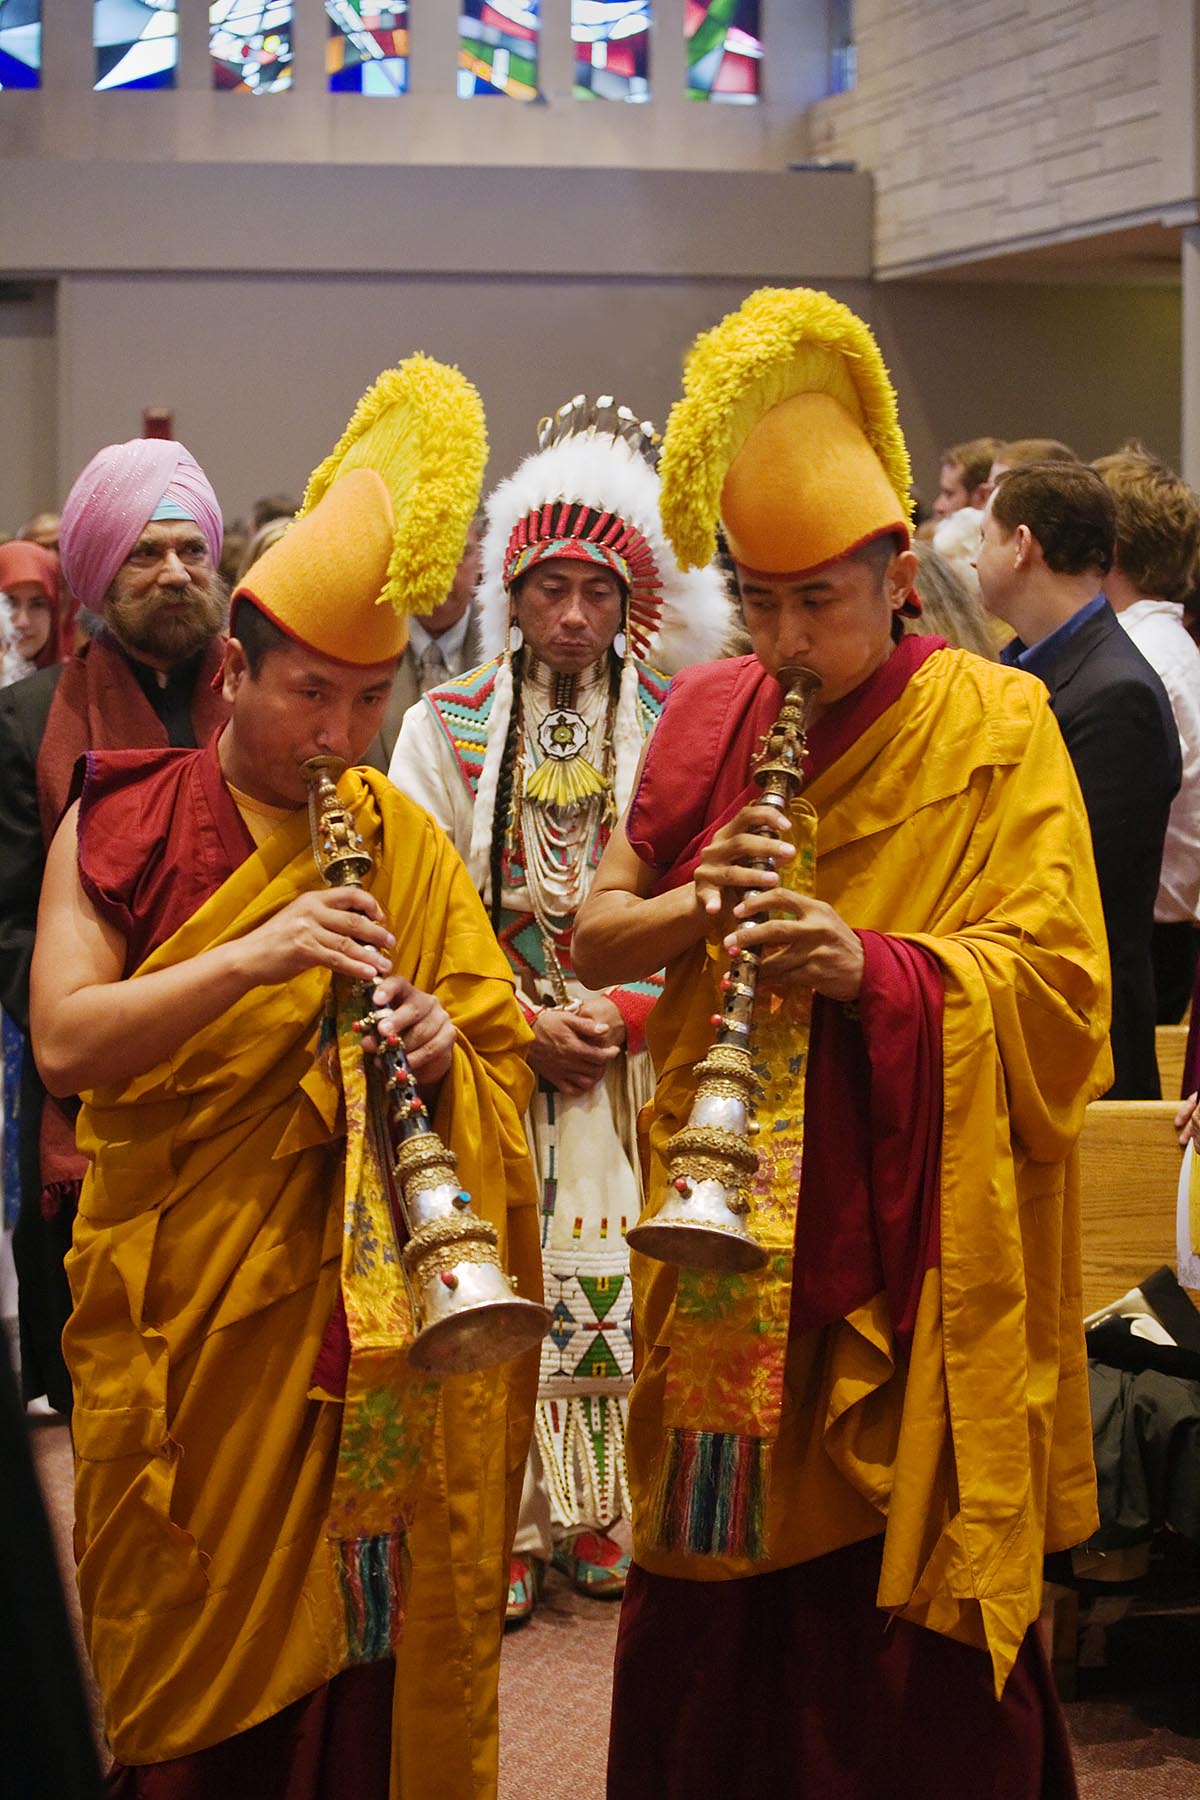 A SIKH K.P. SING, SHOSHONE tribesman JAMES TROSPER and TIBETAN BUDDHIST MONKS blowing horns attend the INTERFAITH PRAYER SERVICE with the DALAI LAMA - ST PAUL CATHOLIC CENTER, BLOOMINGTON, INDIANA